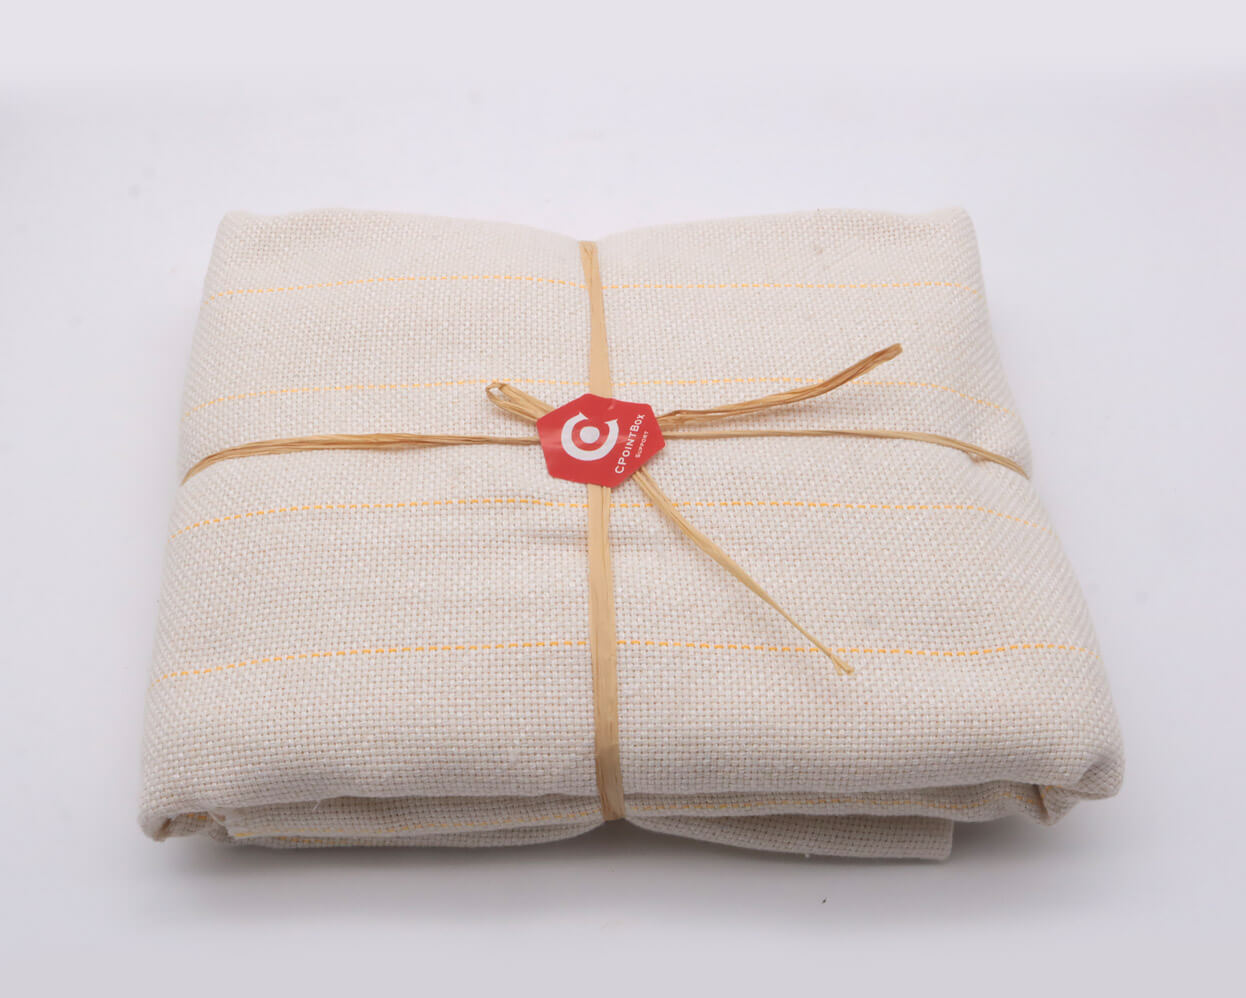 4M 157 Width Tufting Cloth, Monks Cloth With Yellow Guidelines for Tufting  Gun Tufting Fabric 